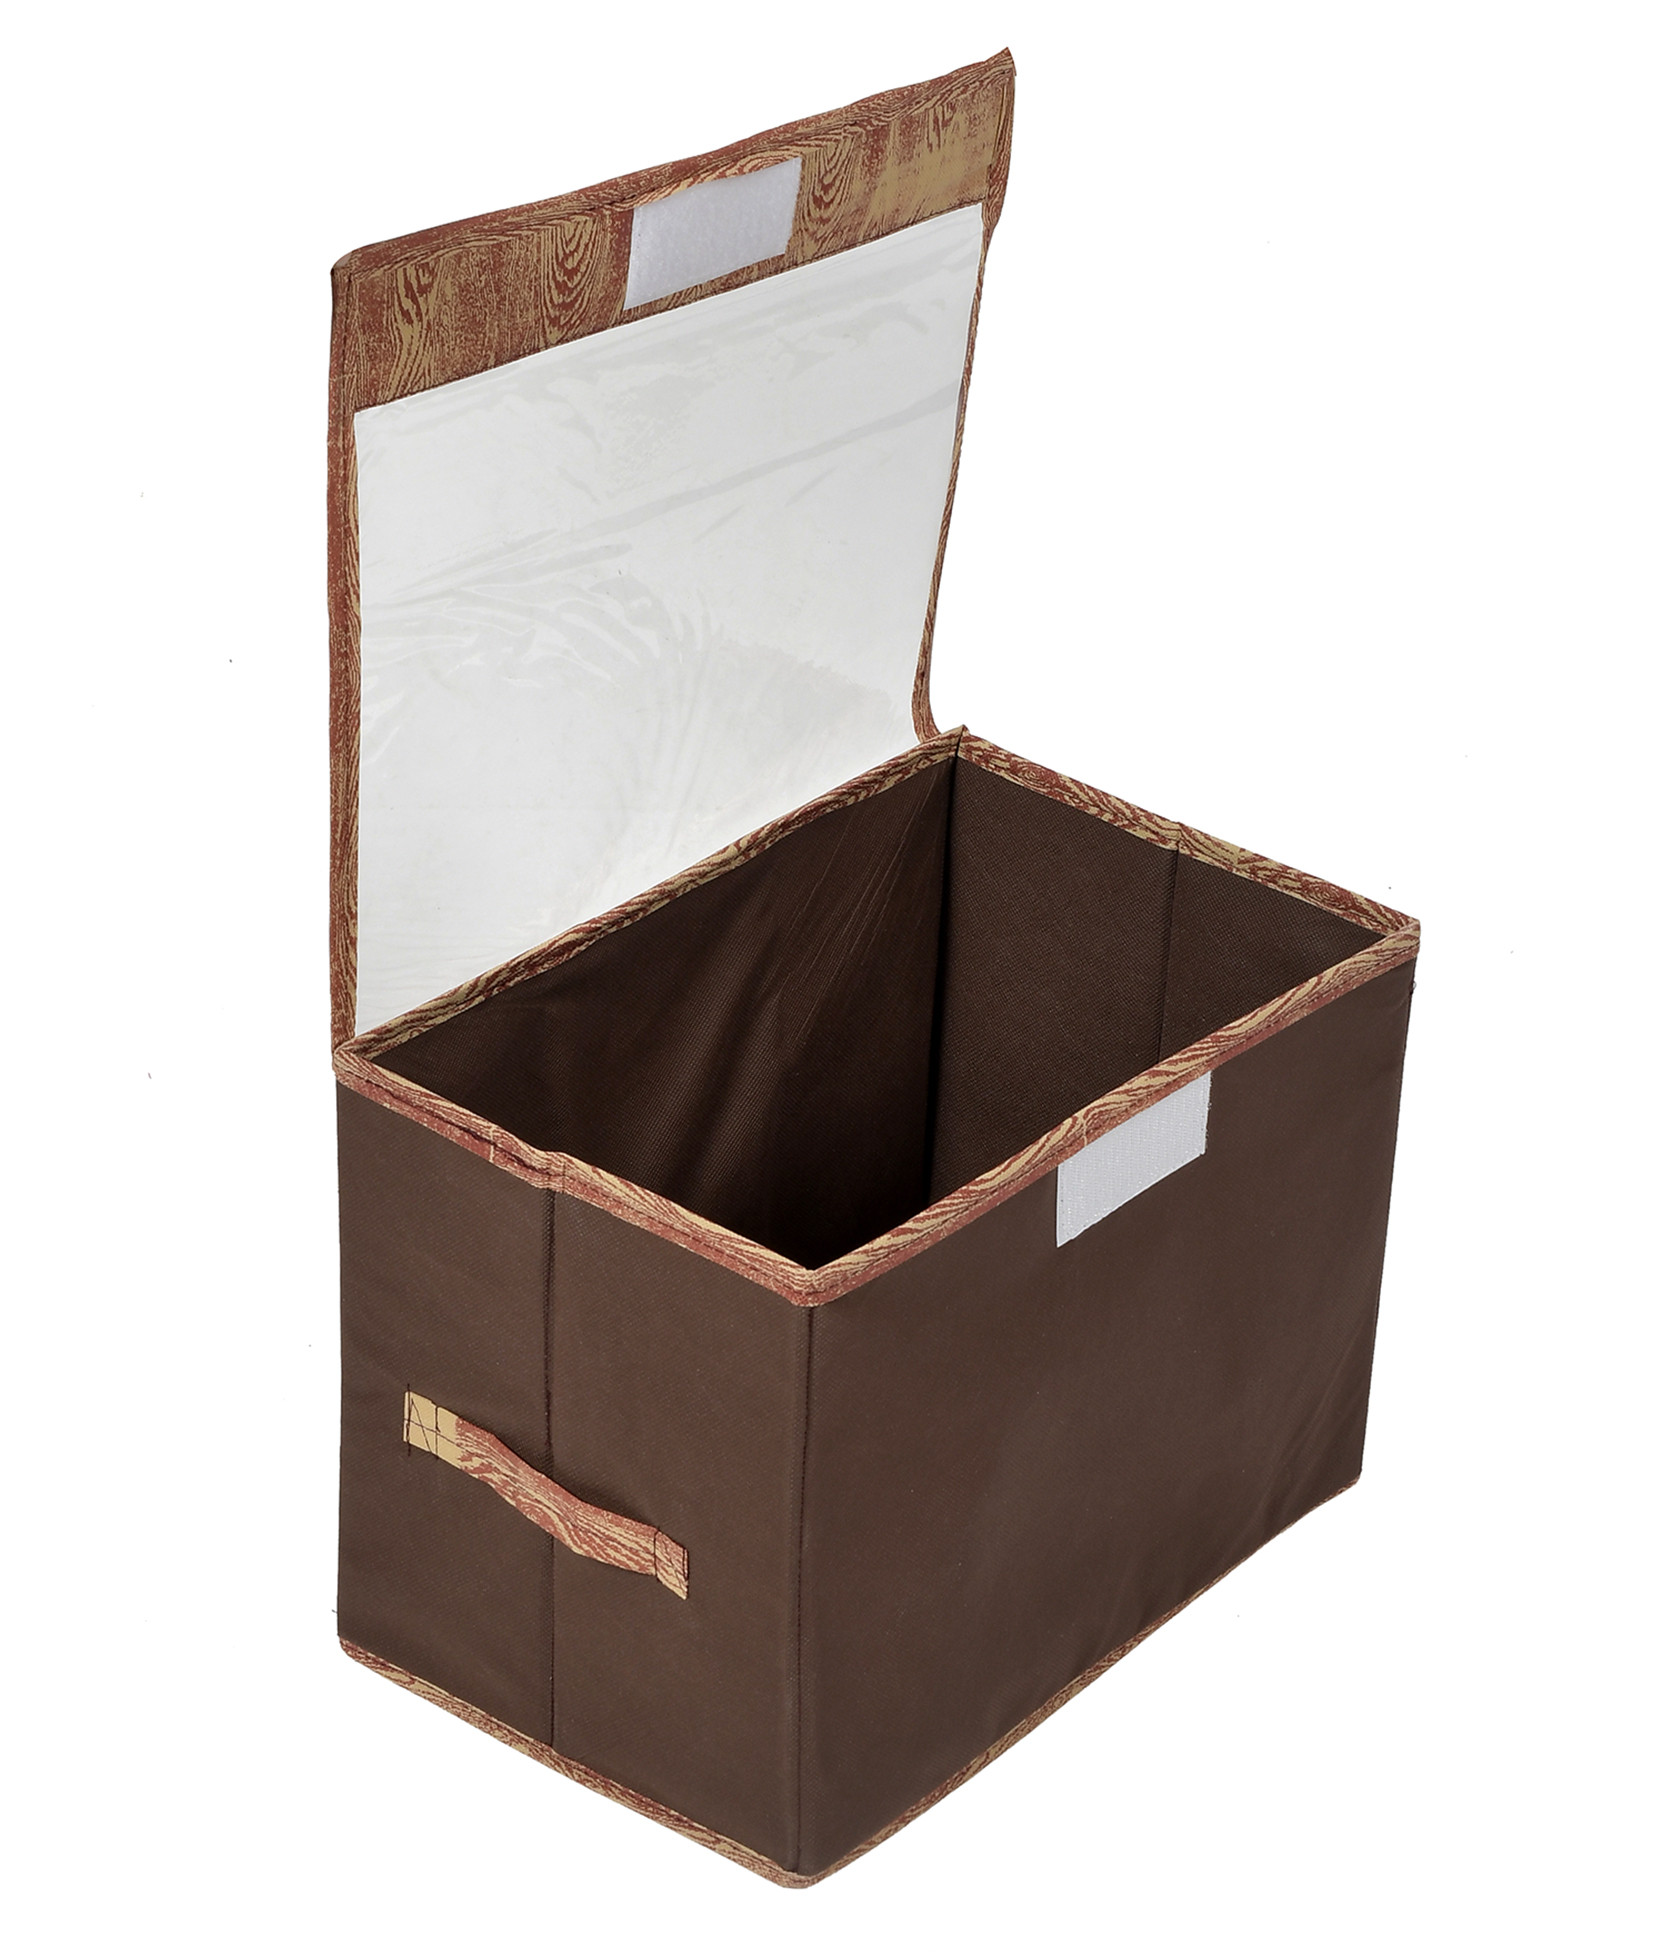 Kuber Industries Wooden Design Multiuses 3 Different Sizes Non-Woven Storage Box/Organizer With Tranasparent Lid- Set of 3 (Brown) -44KM0447